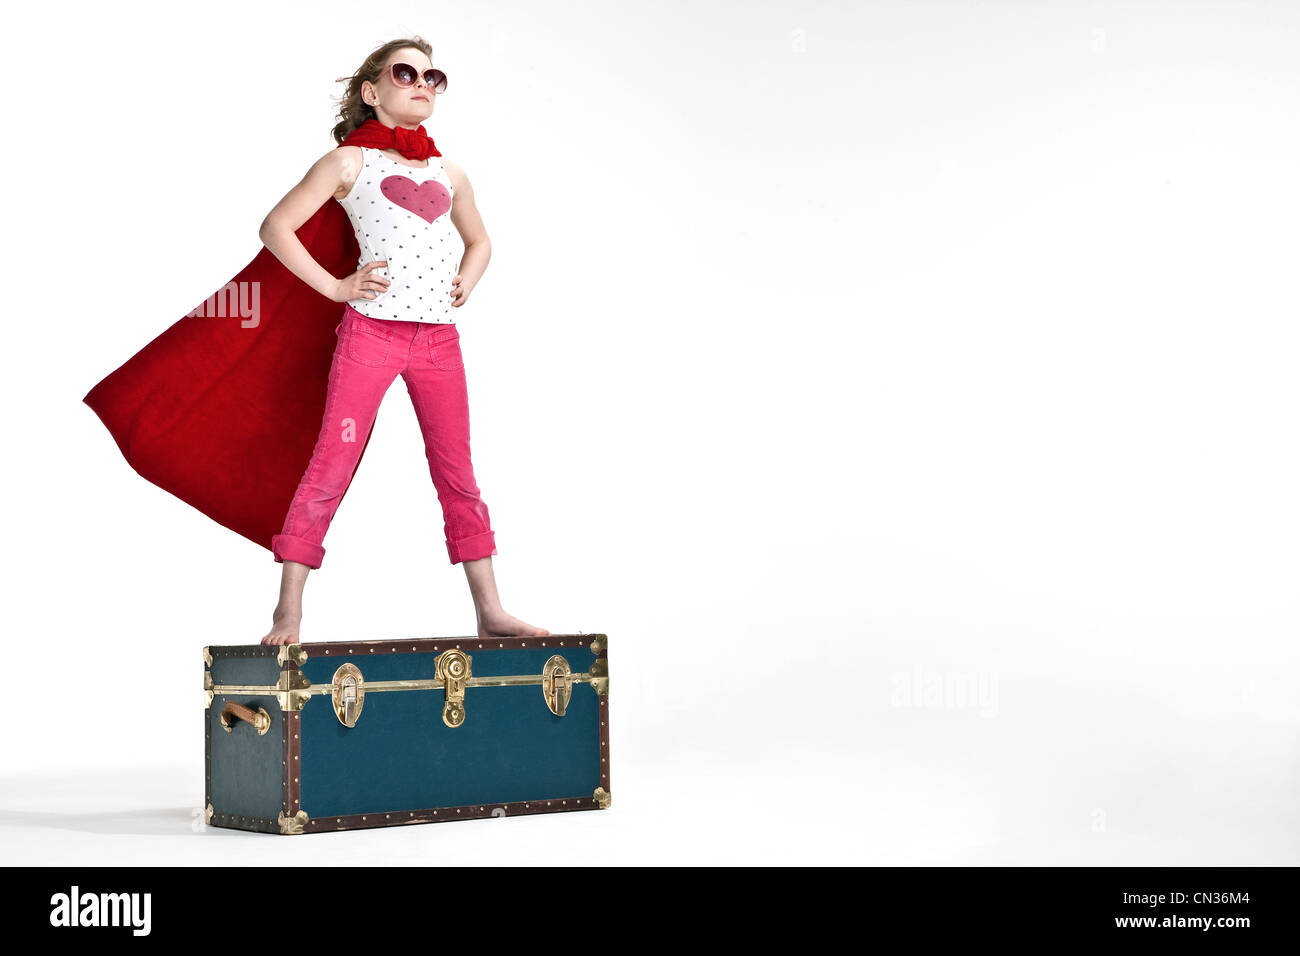 Girl standing on trunk suitcase dressed as superhero Stock Photo